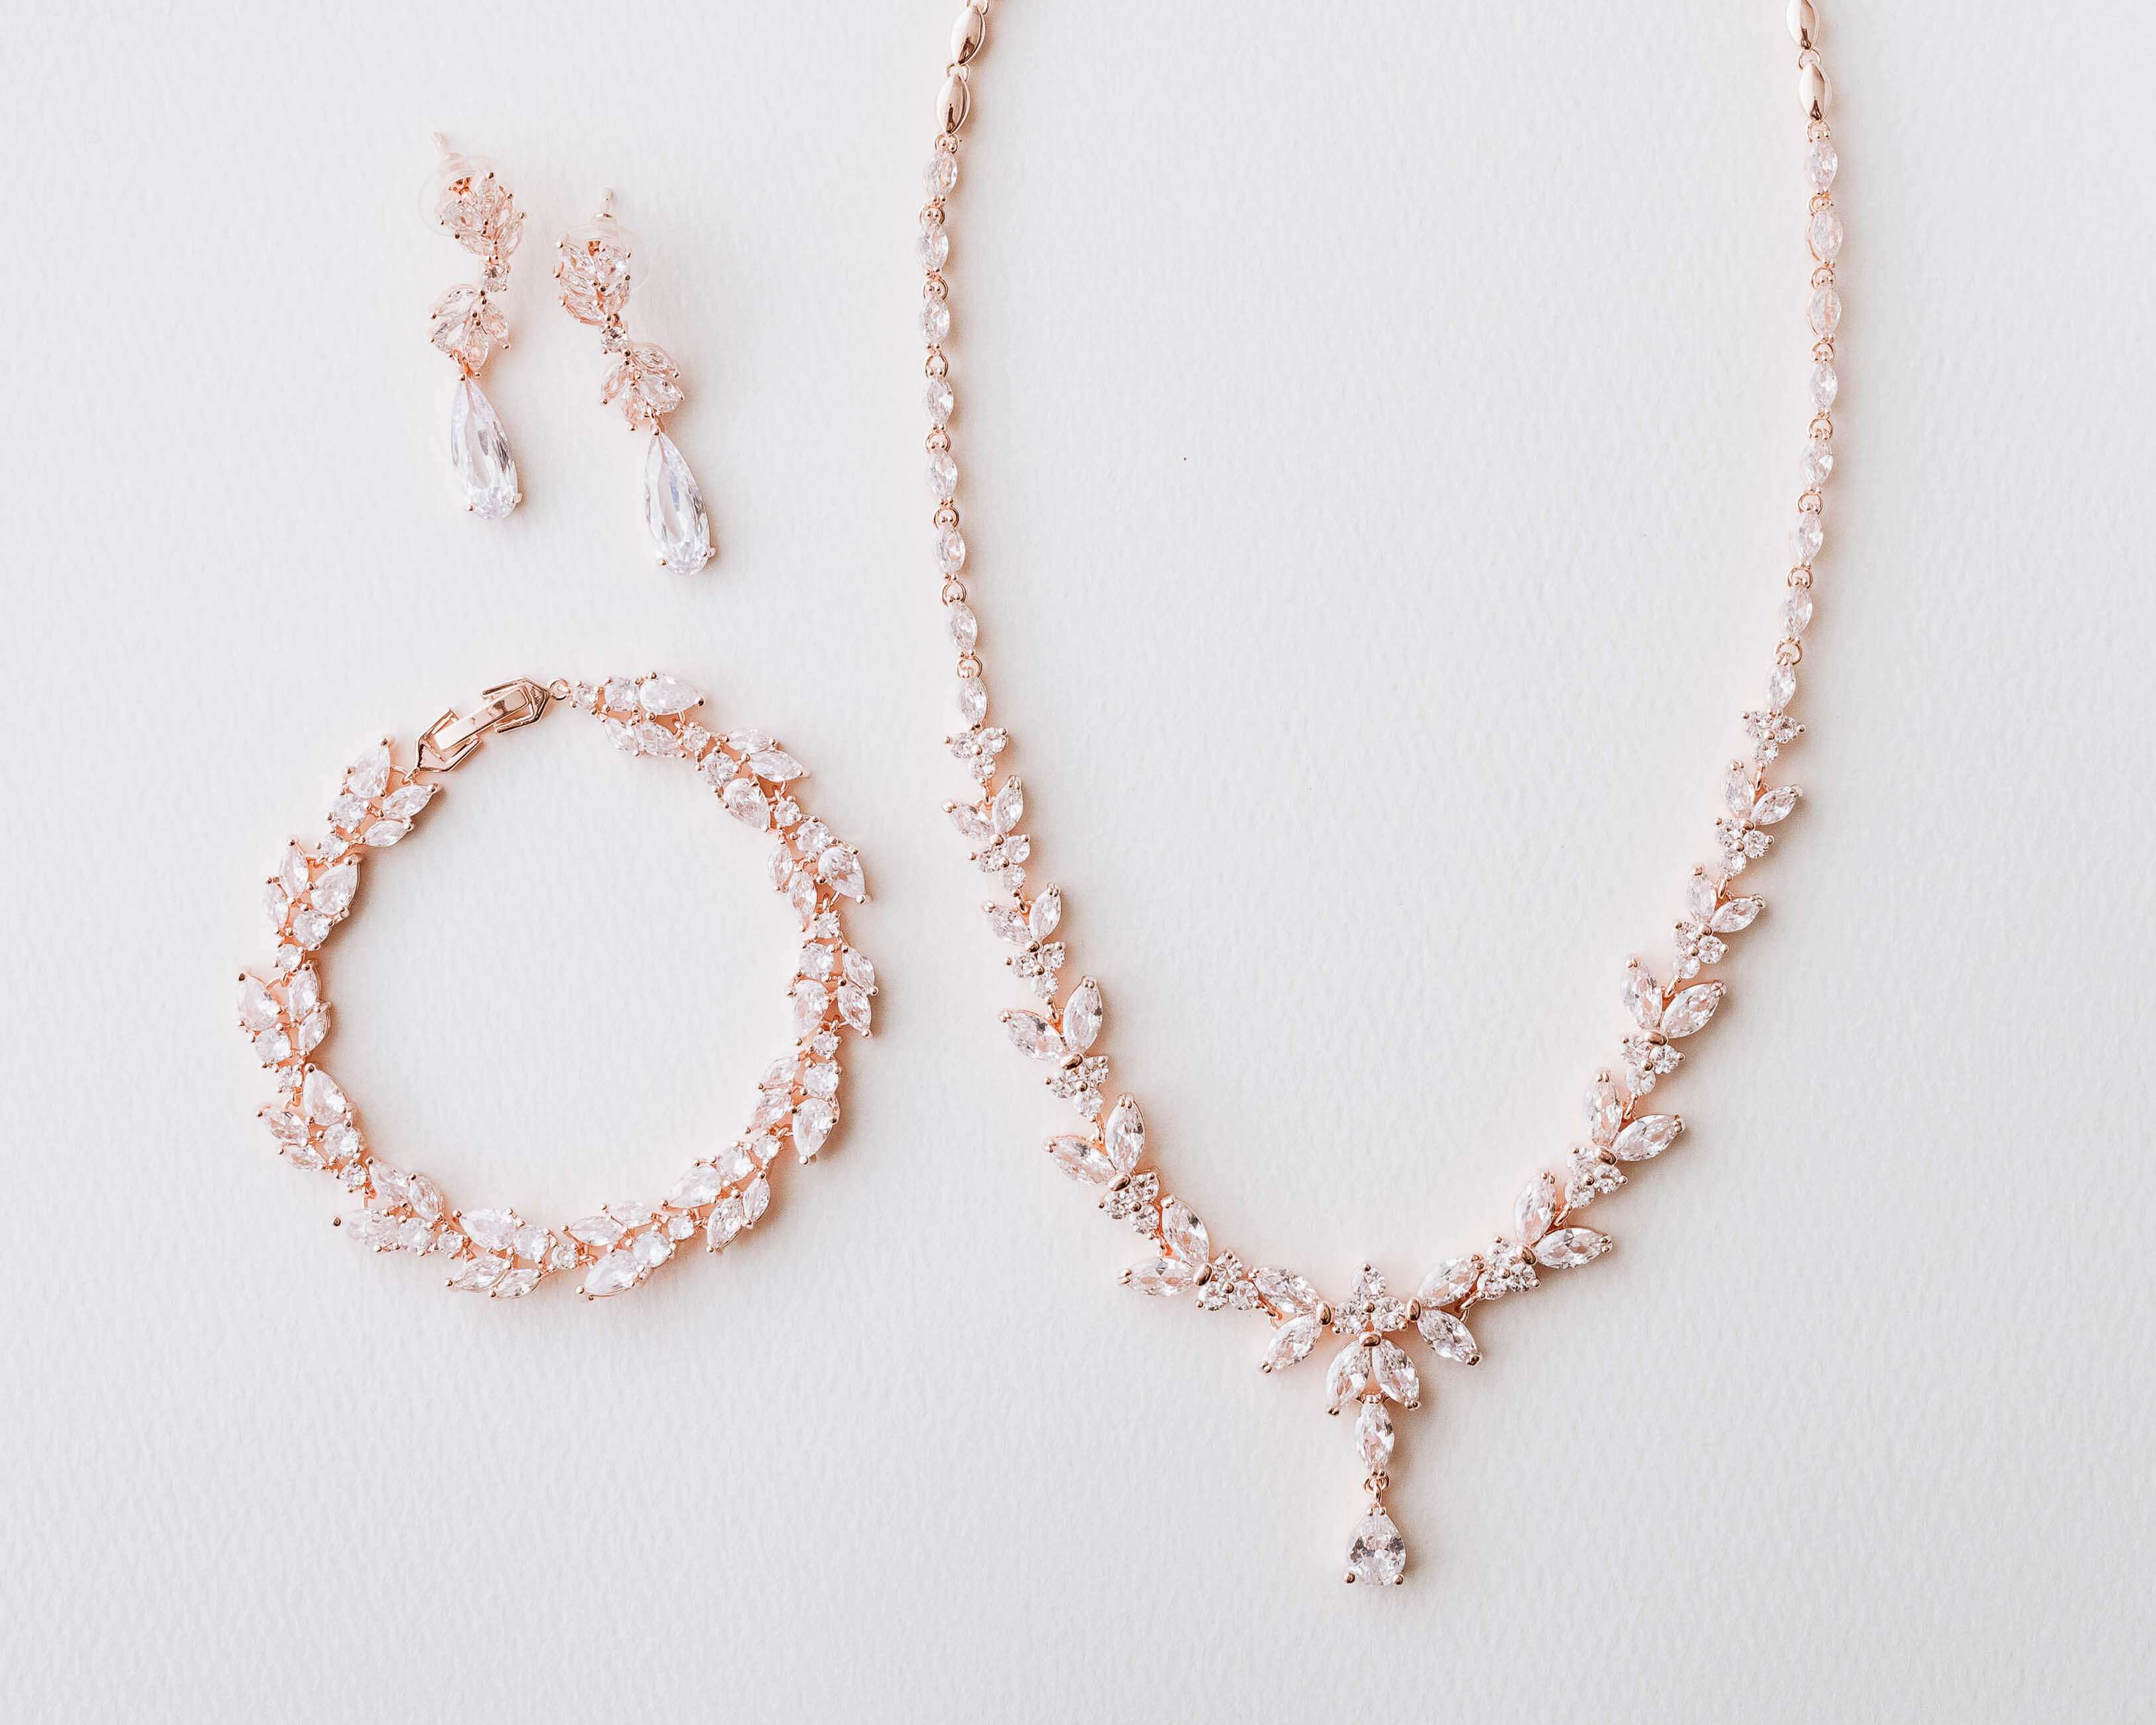 Rosegold Wedding Jewelry Set - The perfect Bridal Accessories.